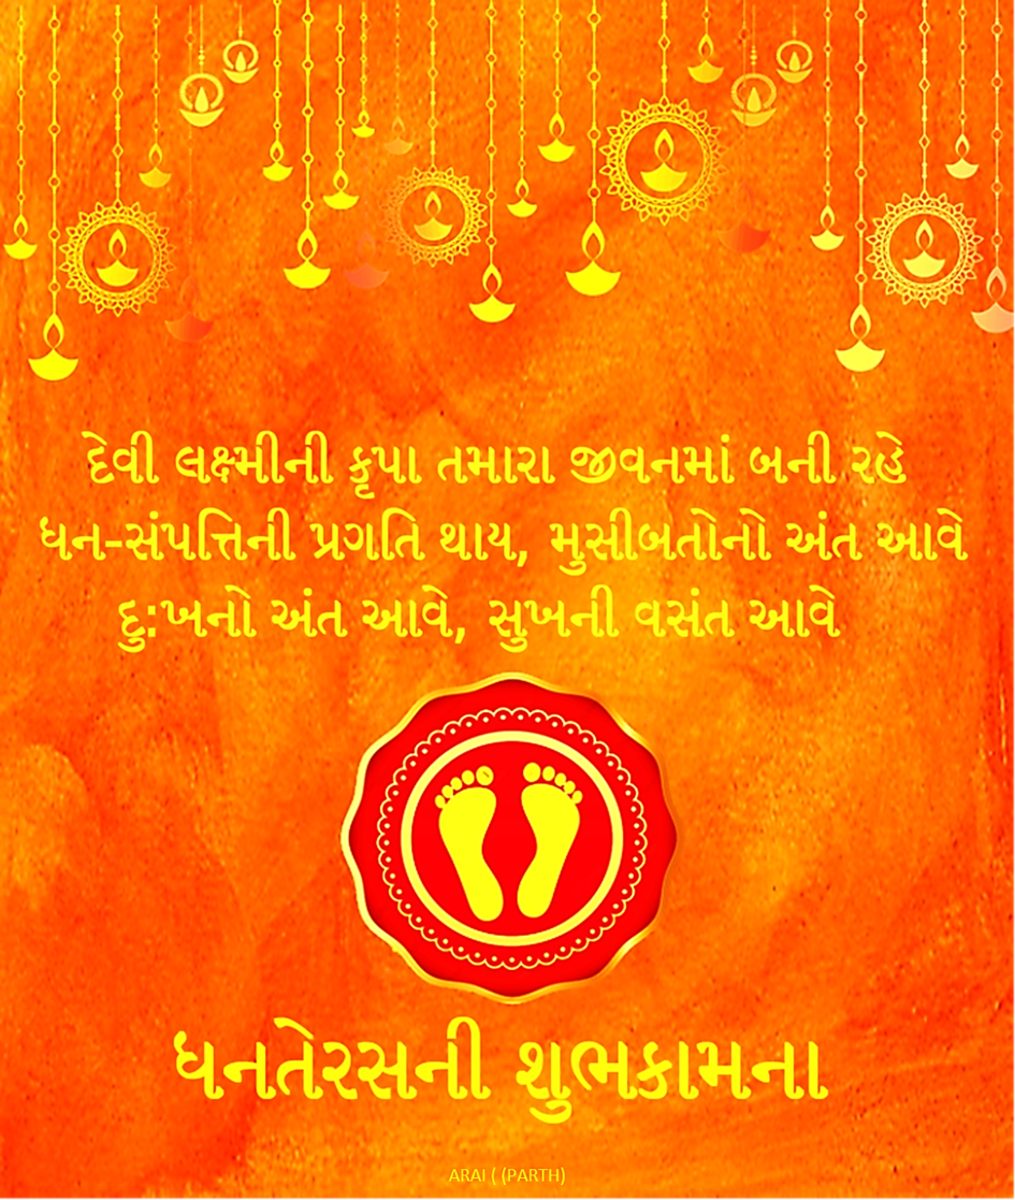 dhanteras-wishes-and-greetings-in-gujarati-languages